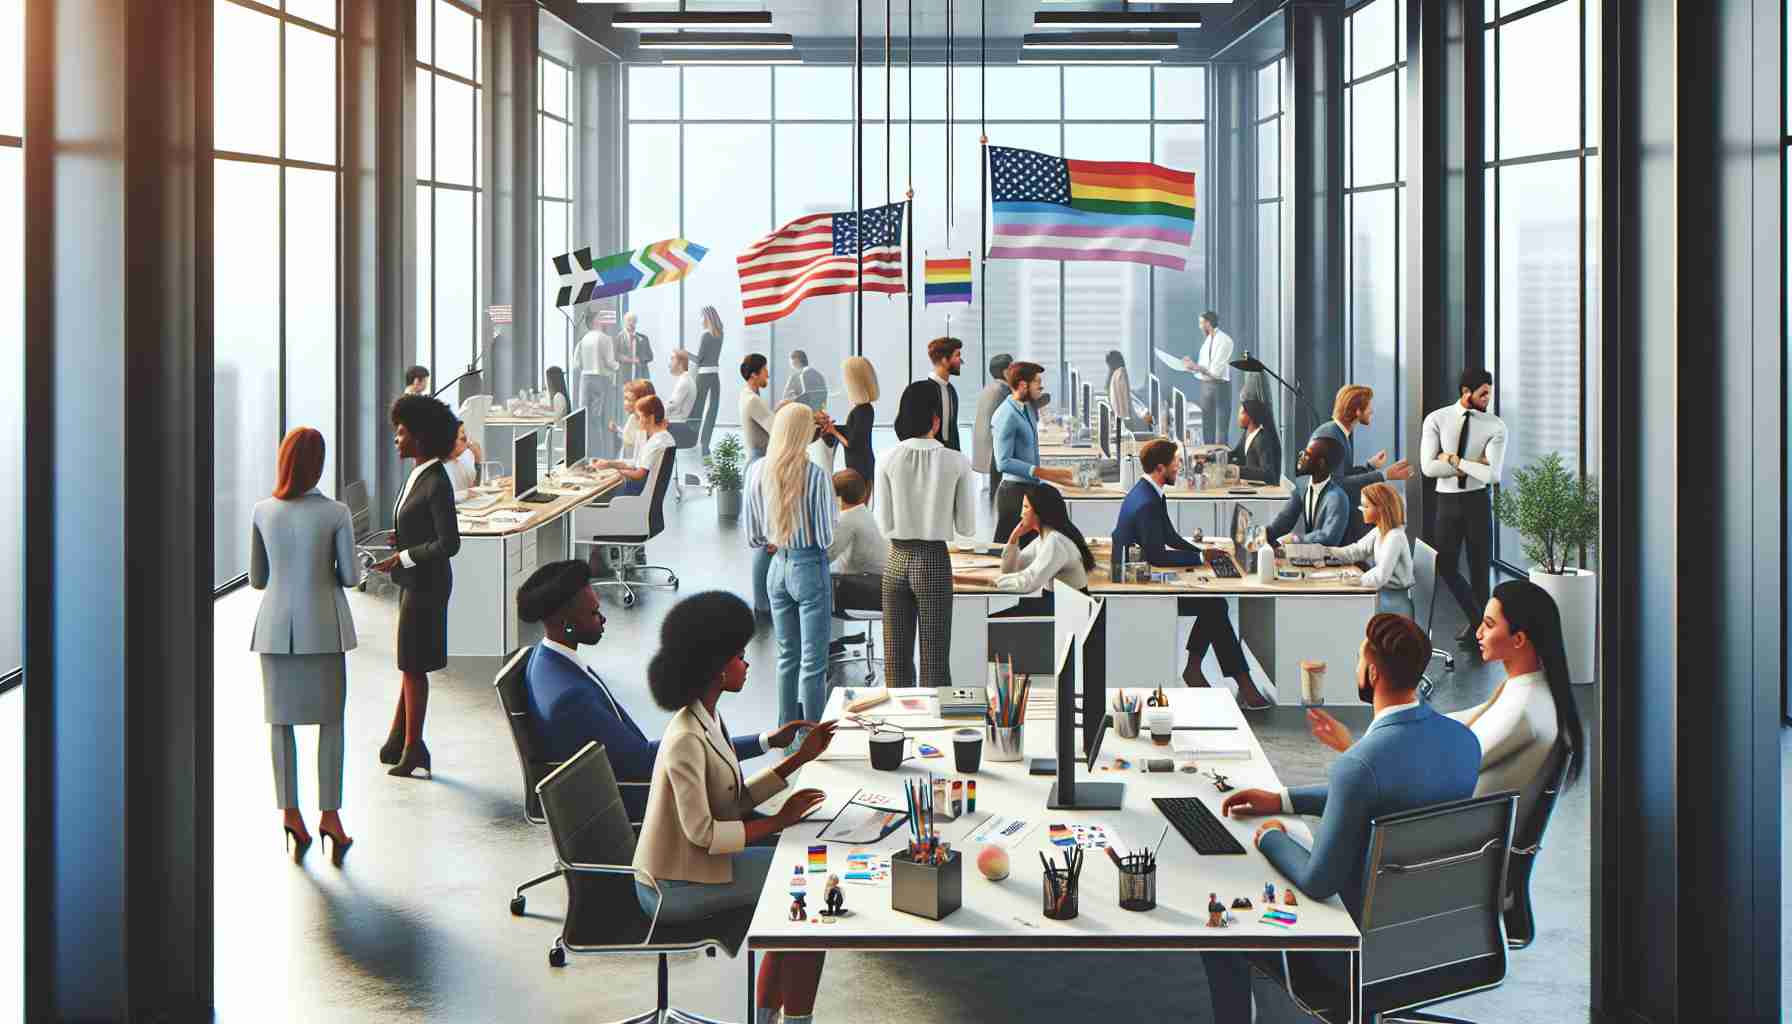 Create a realistic, high-definition image of a corporate environment expressing support for the LGBTQ+ community. Picture a modern office space where a range of employees from different descents such as Black, Hispanic and South Asian are engaged in their work. The gender distribution is balanced. Elements like LGBTQ+ flags, pins, and stickers are visible, emphasizing the company's decisive support. The air is abuzz with productivity, inclusivity, and acceptance. Everyone is dressed in the appropriate business attire suitable for a corporate setting.